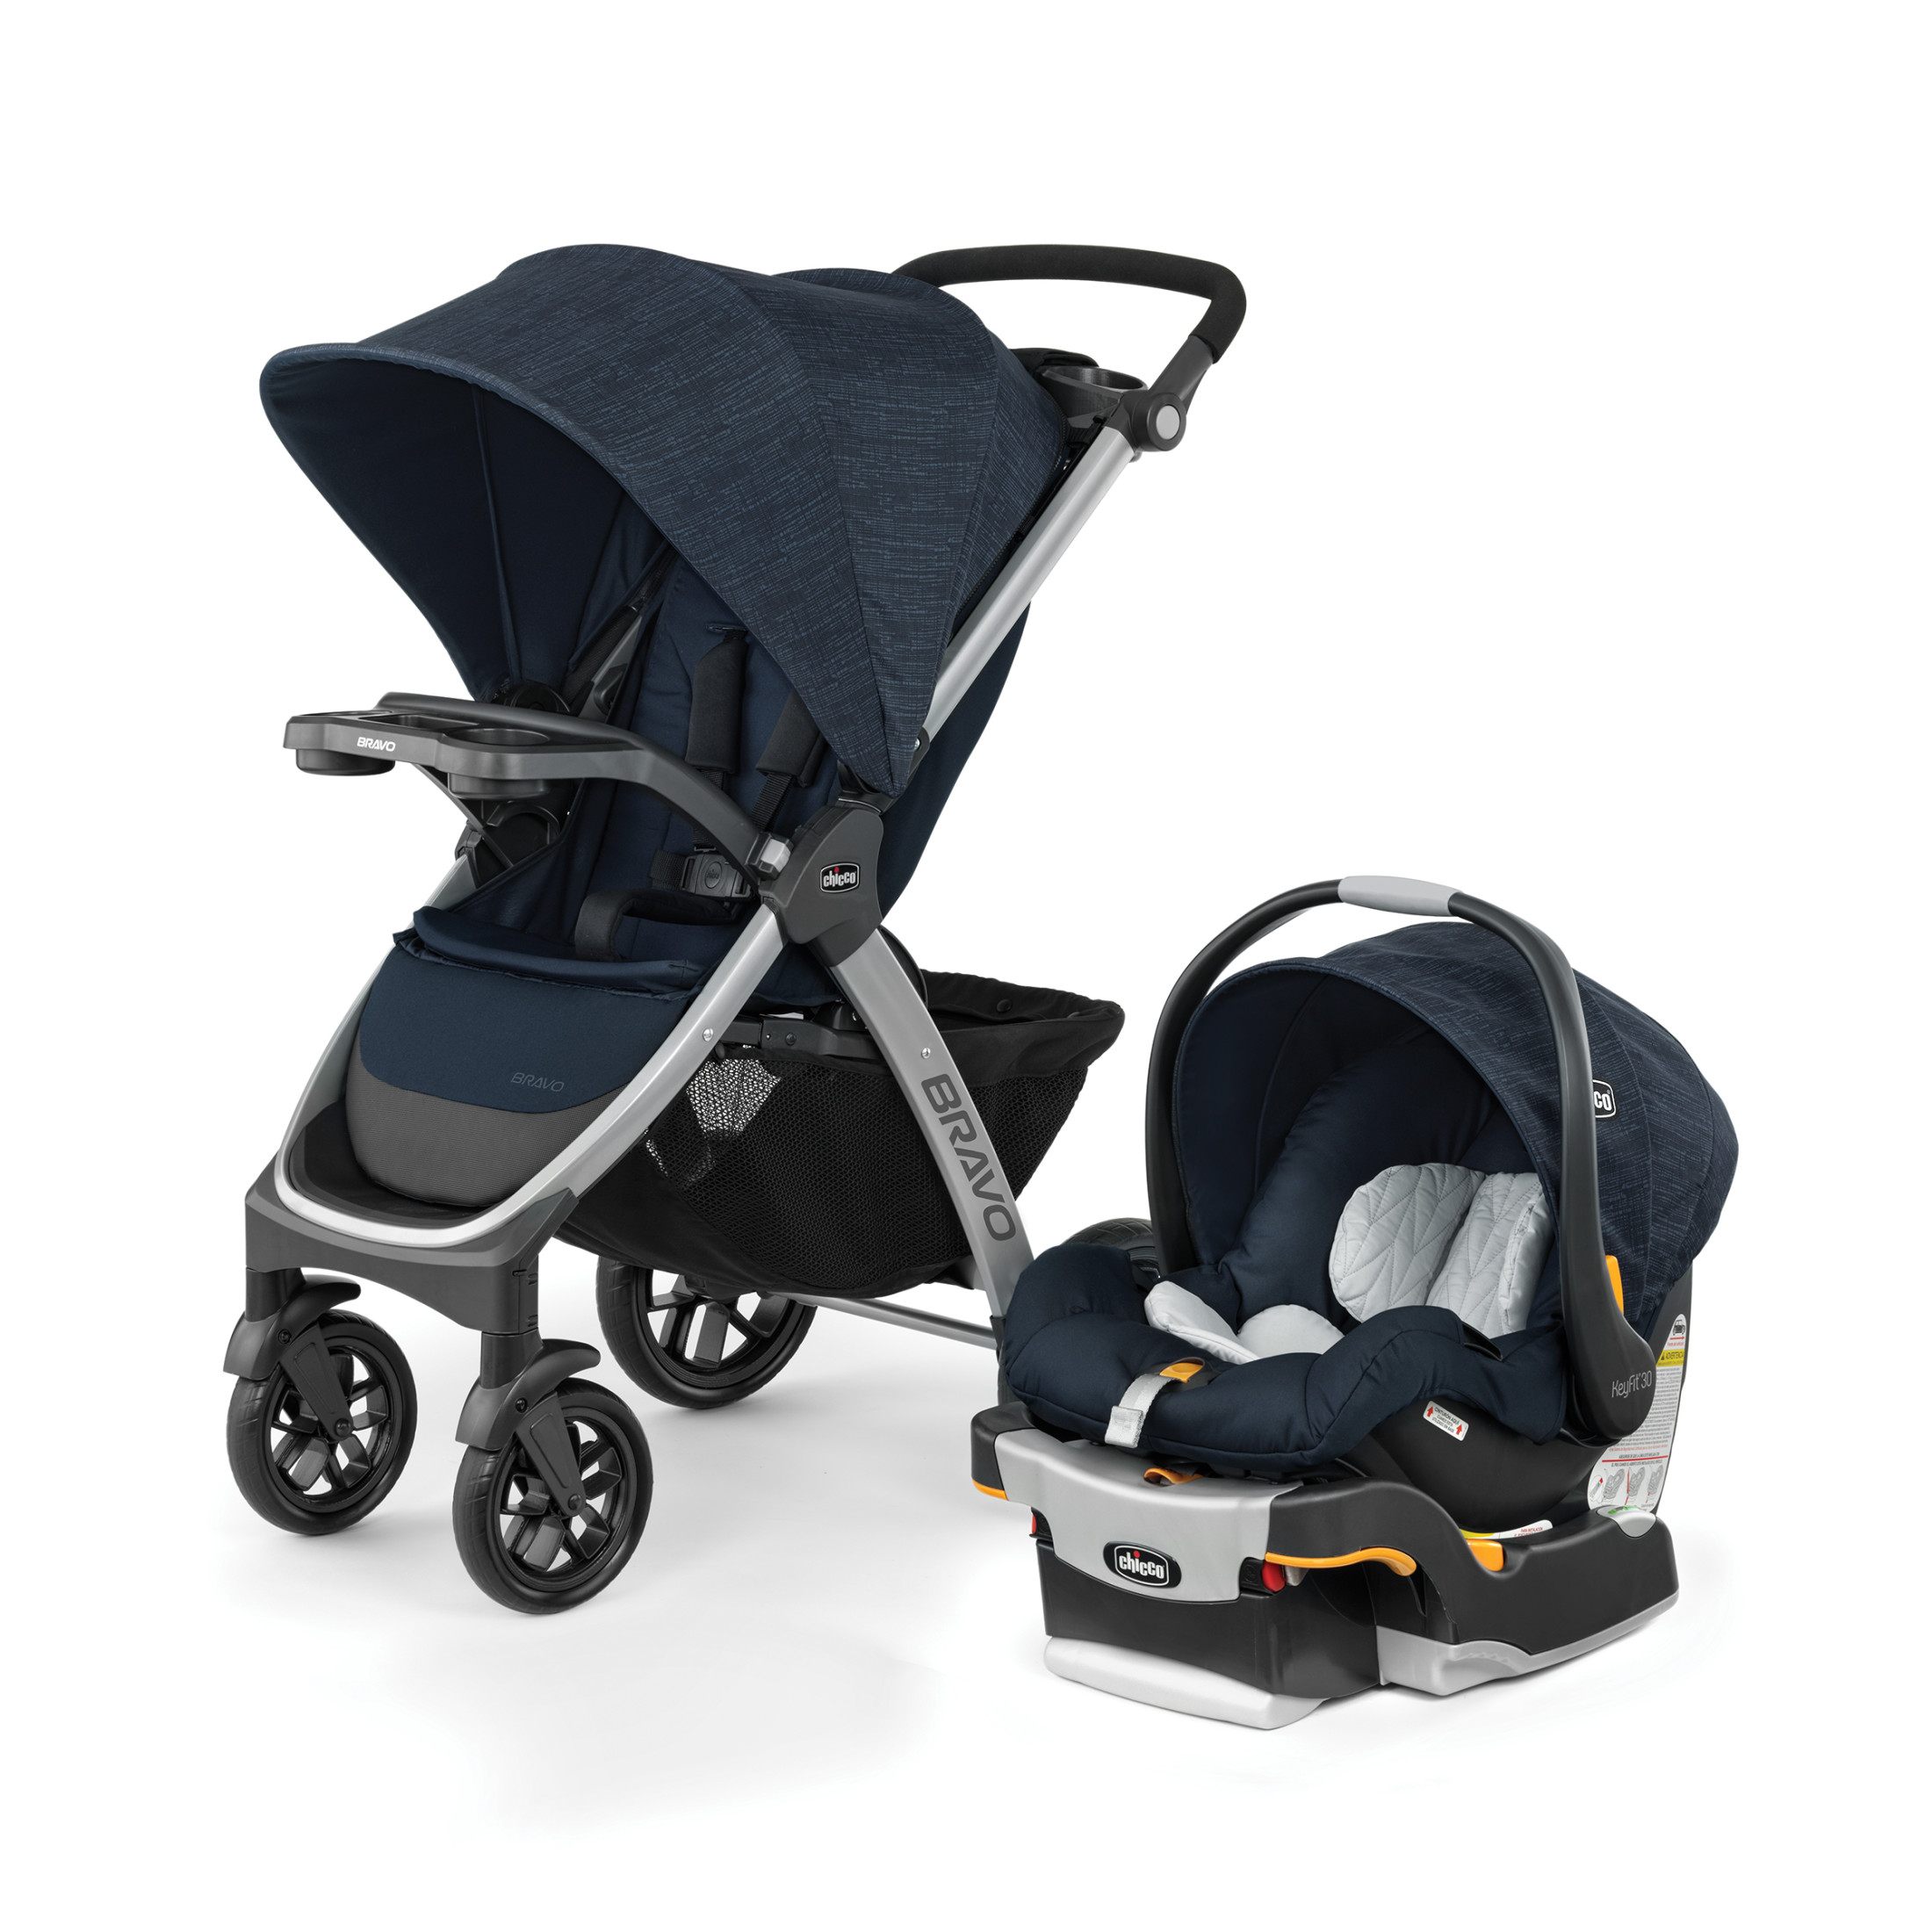 Chicco Bravo Trio Travel System Stroller with KeyFit 30 Infant Car Seat - Brooklyn (Navy) - image 1 of 14